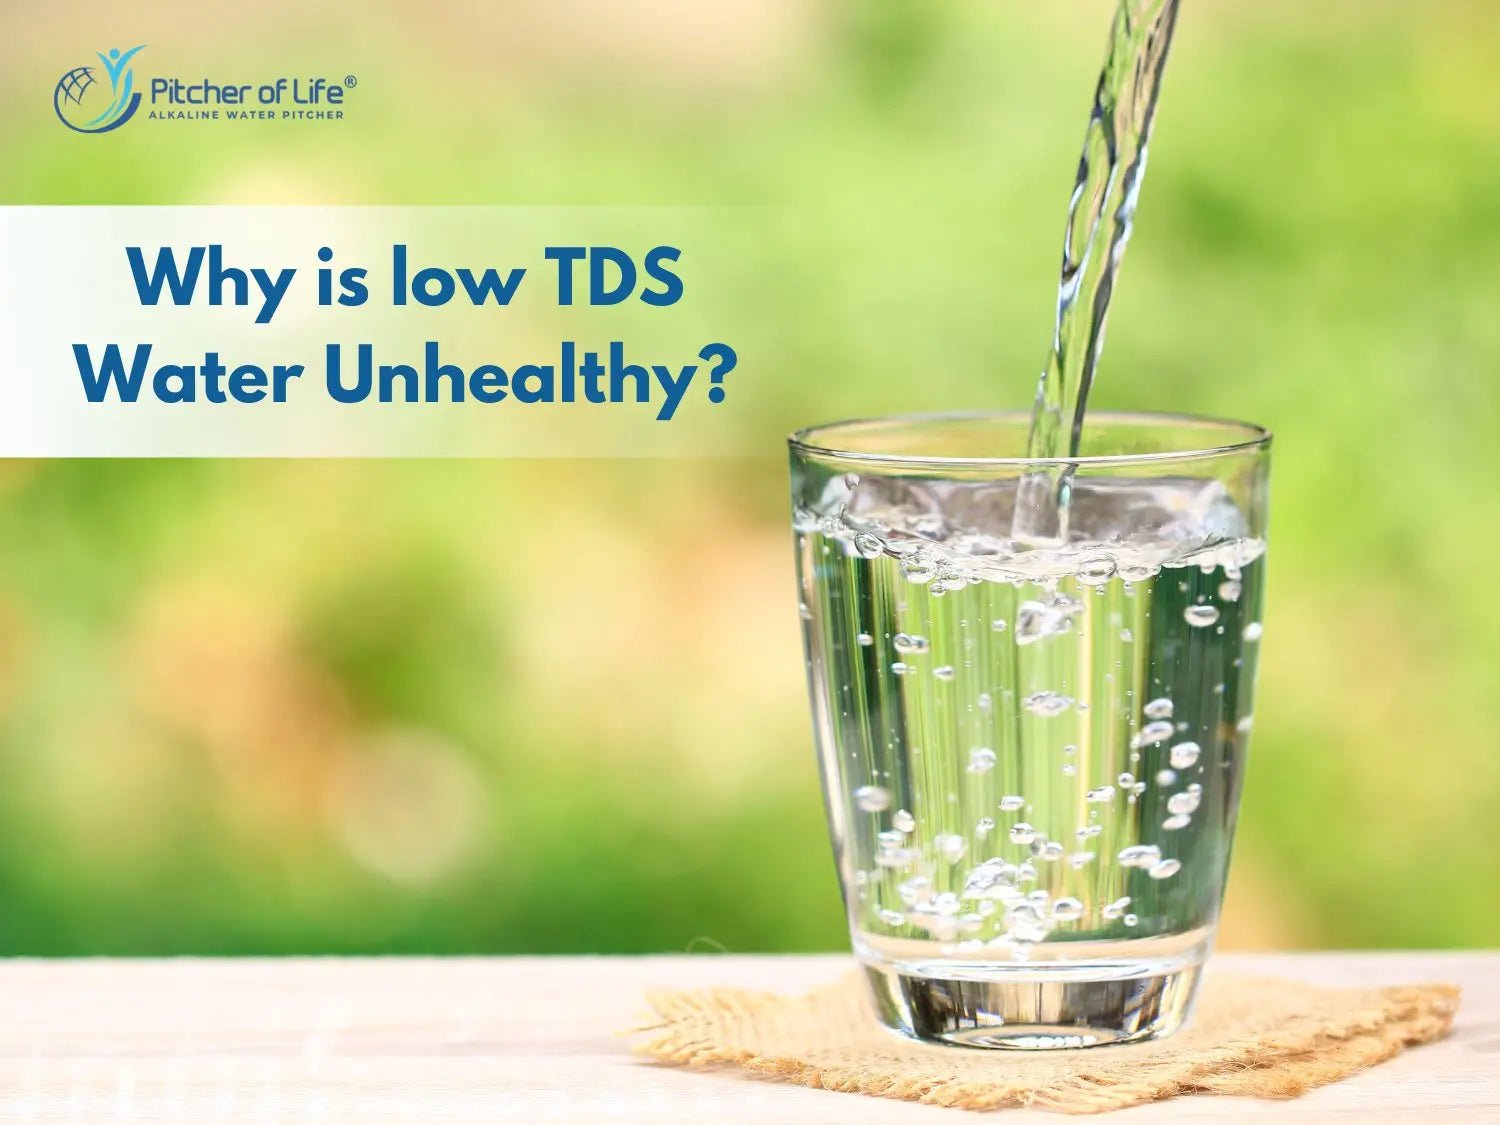 Why is low TDS water unhealthy? - Pitcher of Life